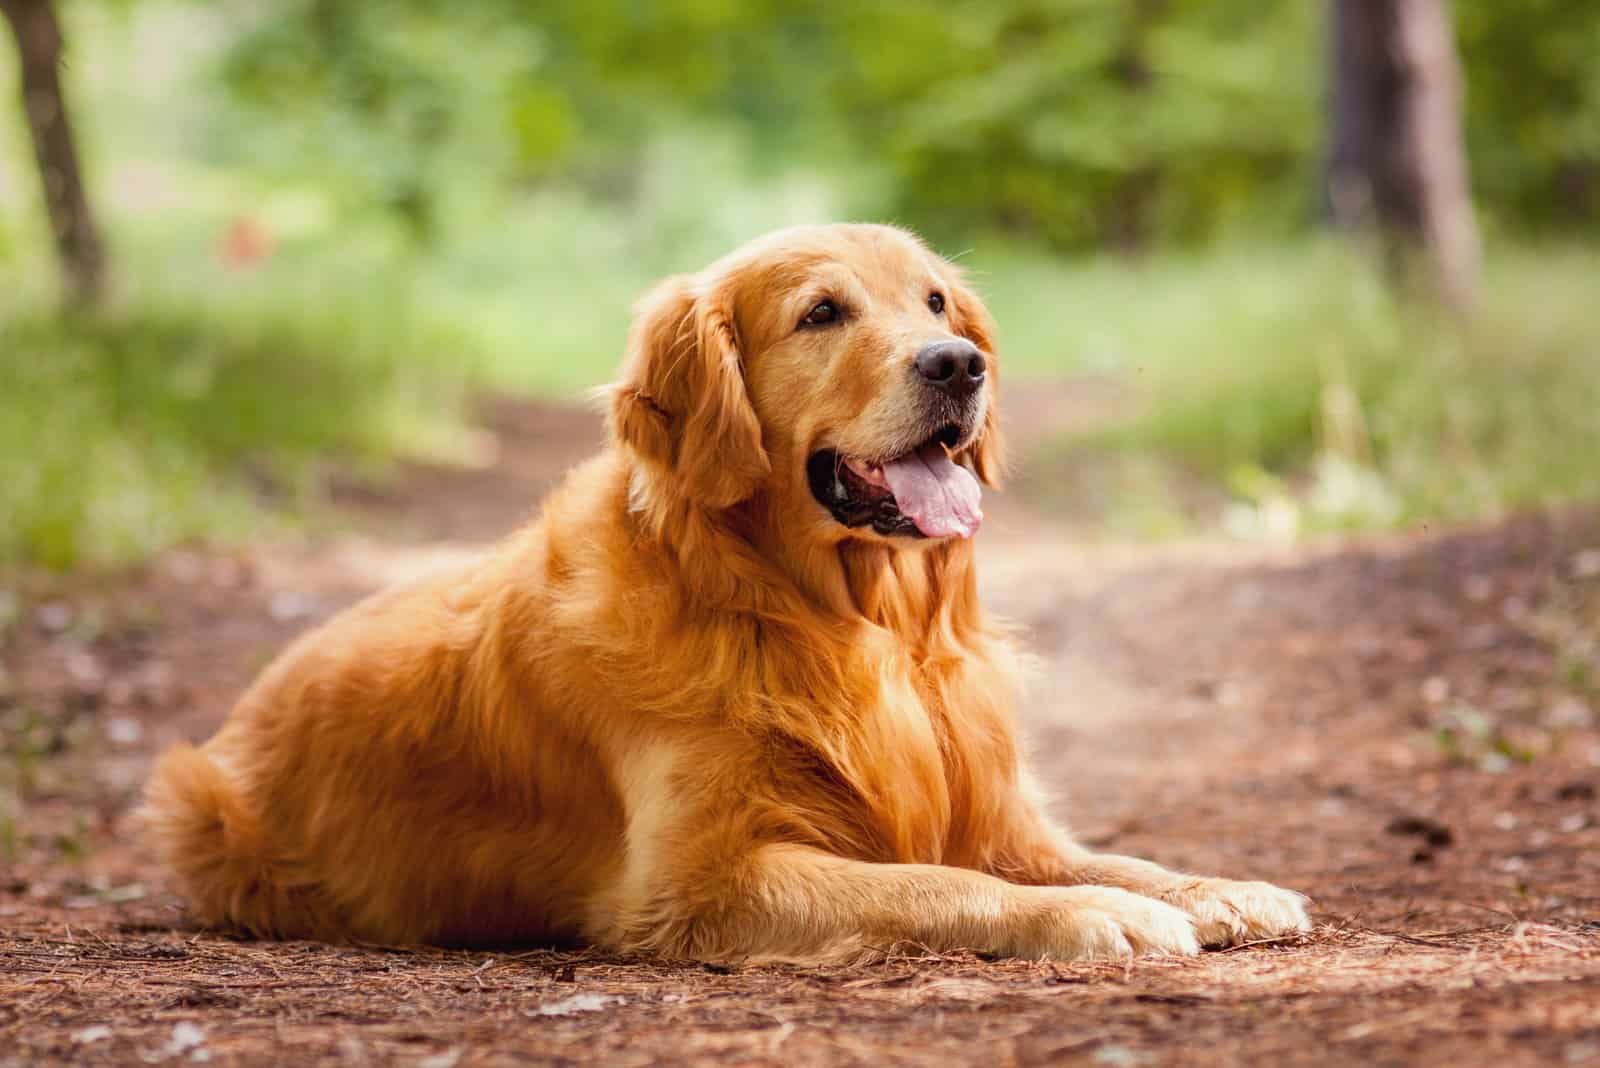 The Golden Retriever lies on the road in the woods